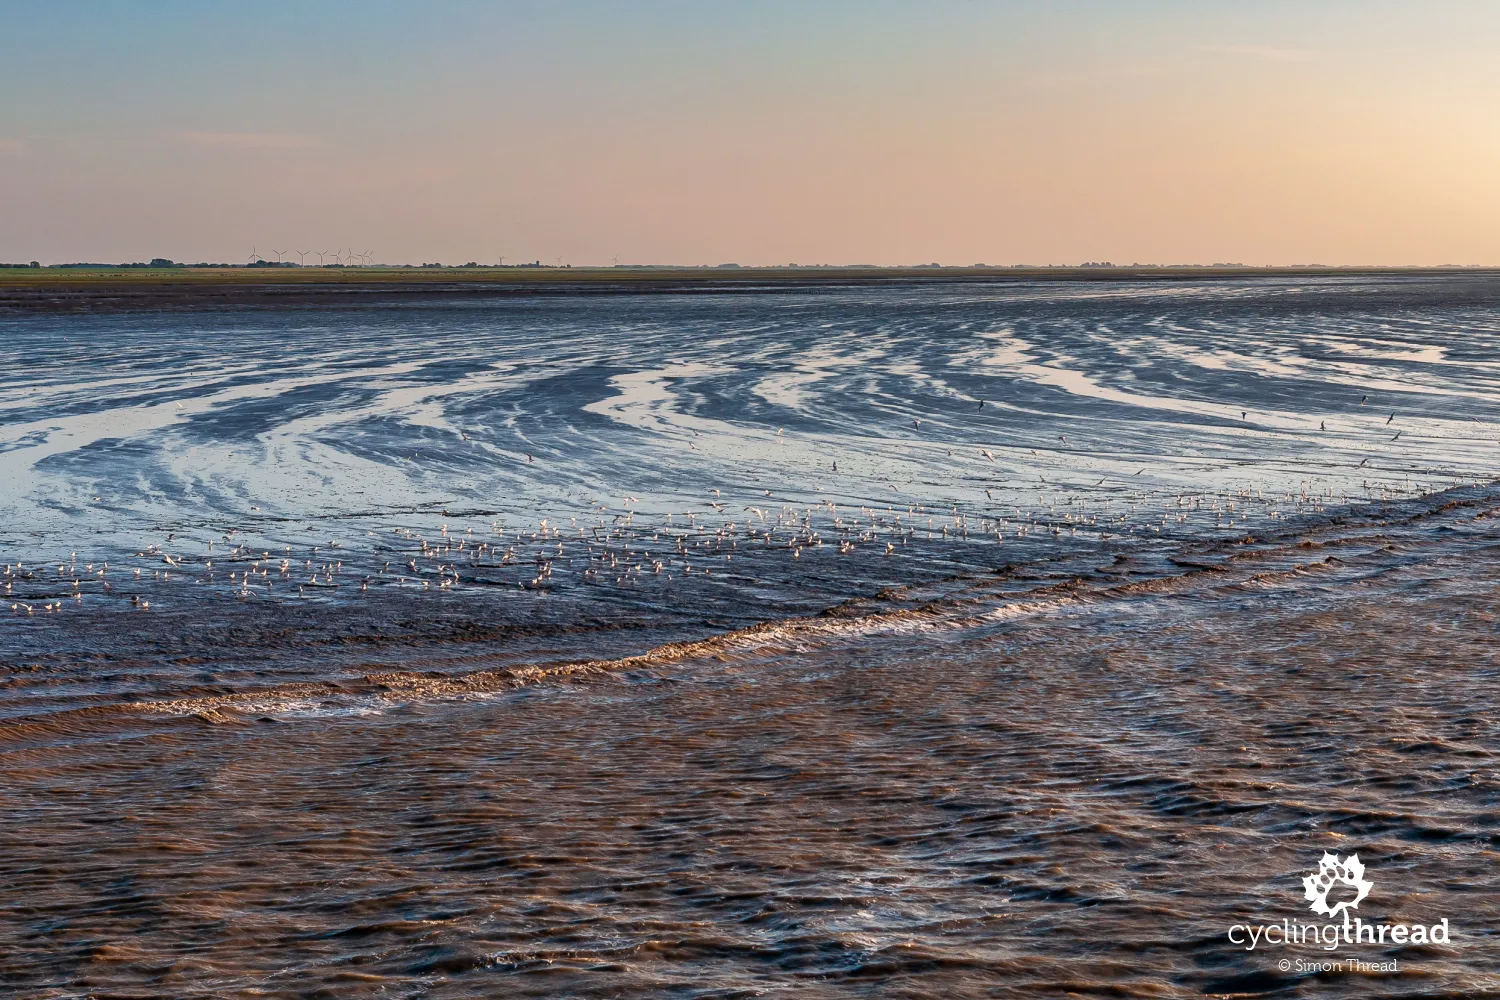 The Wadden Sea at shallow water